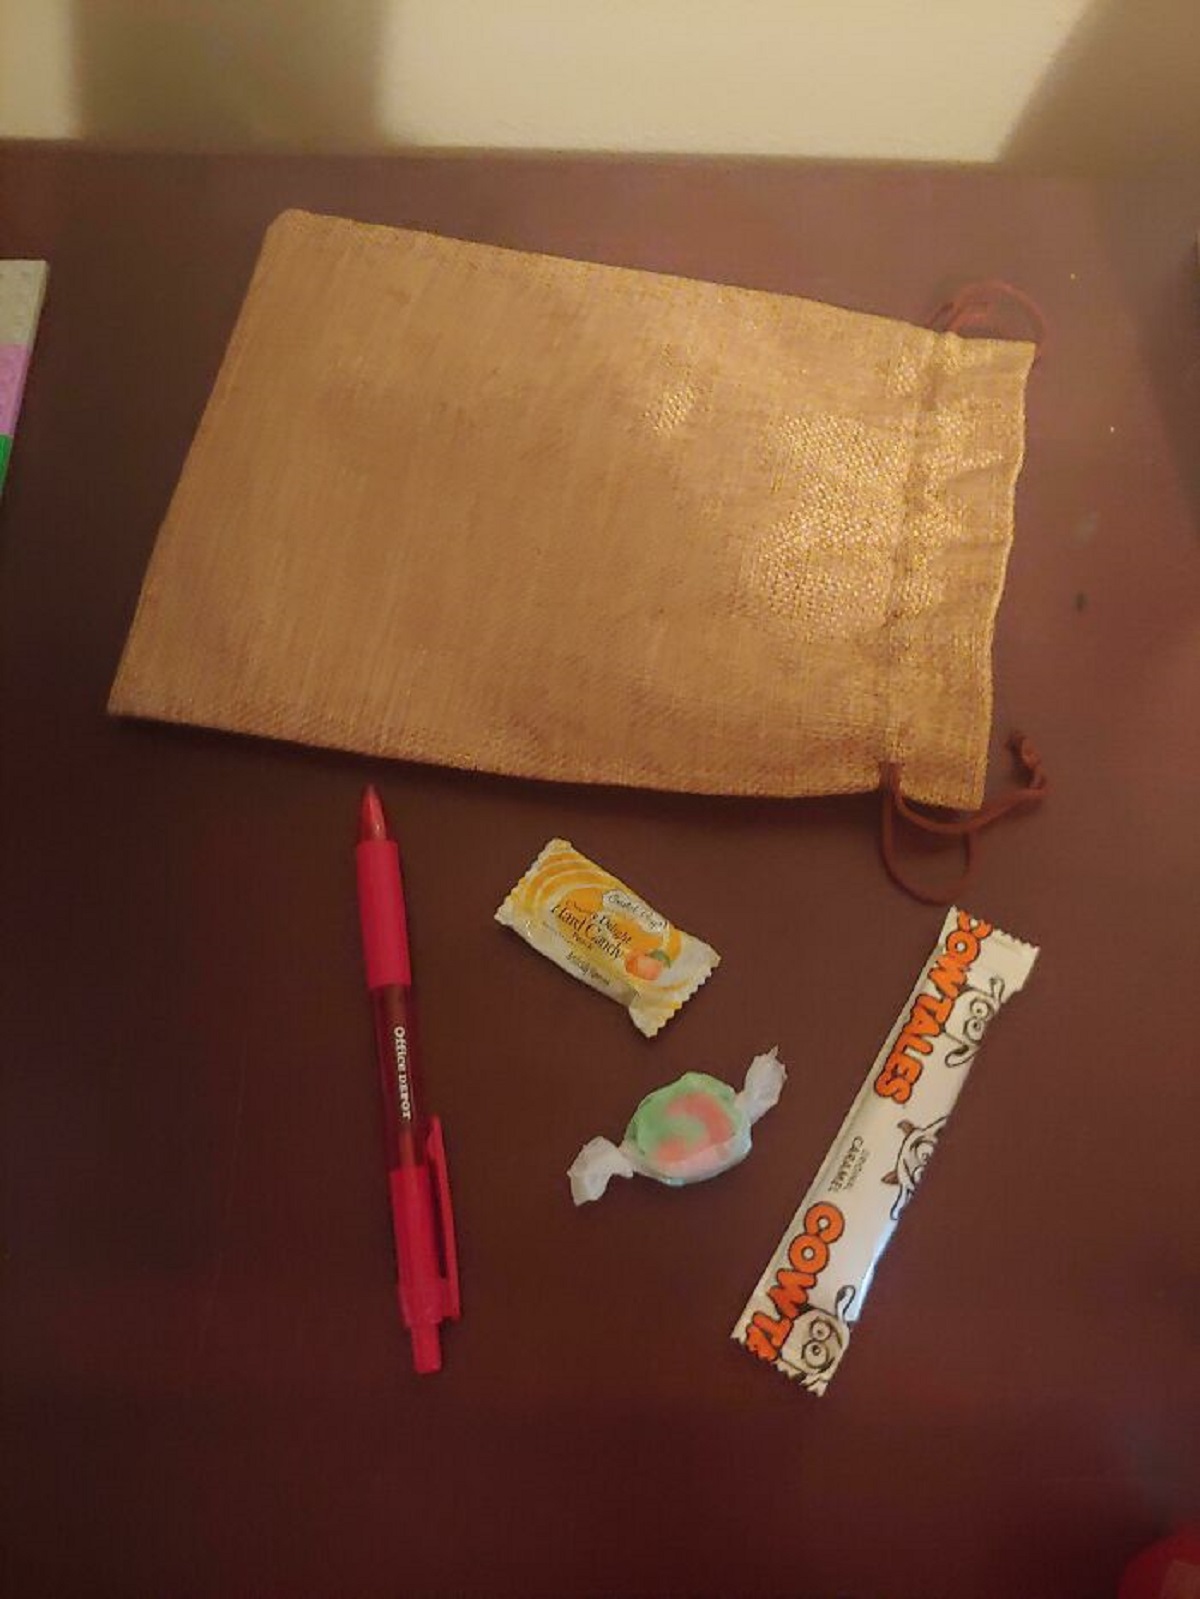 Took One Of Those Employee Surveys At Work Today, And They Gave Me This As A Gift Bag. 3 Pieces Of Candy From 1972 And A Pen That Doesn’t Even Work. Sure Feel Appreciated!